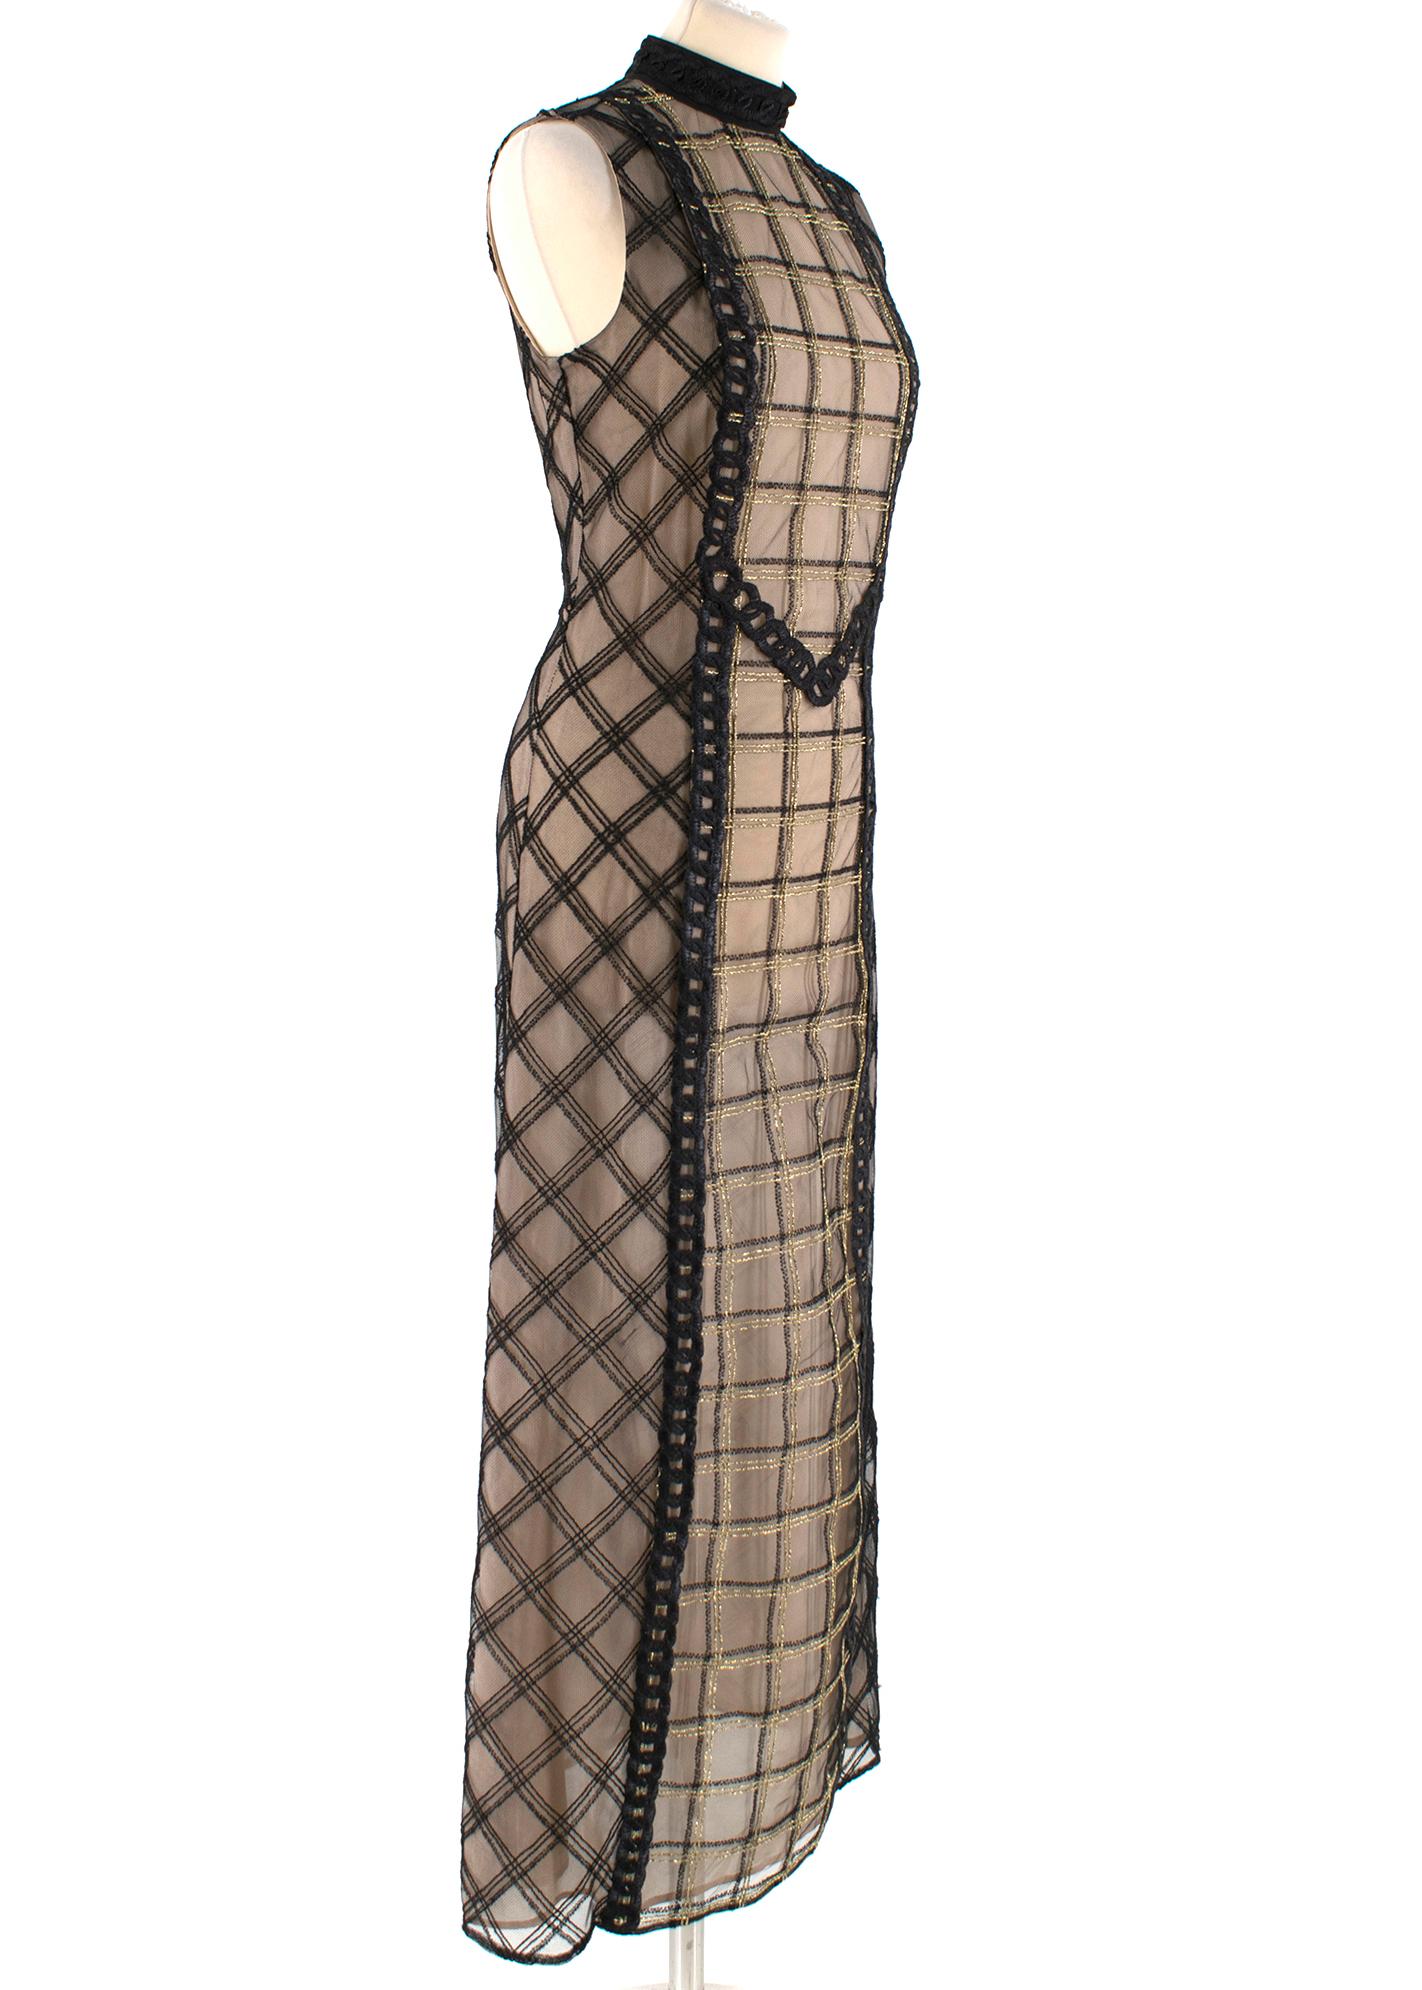 Alessandra Rich black sleeveless dress with gold and black macrame chain with checked pattern and features a high round neck along with a black zipper

âPlease note, these items are pre-owned and may show signs of being stored even when unworn and